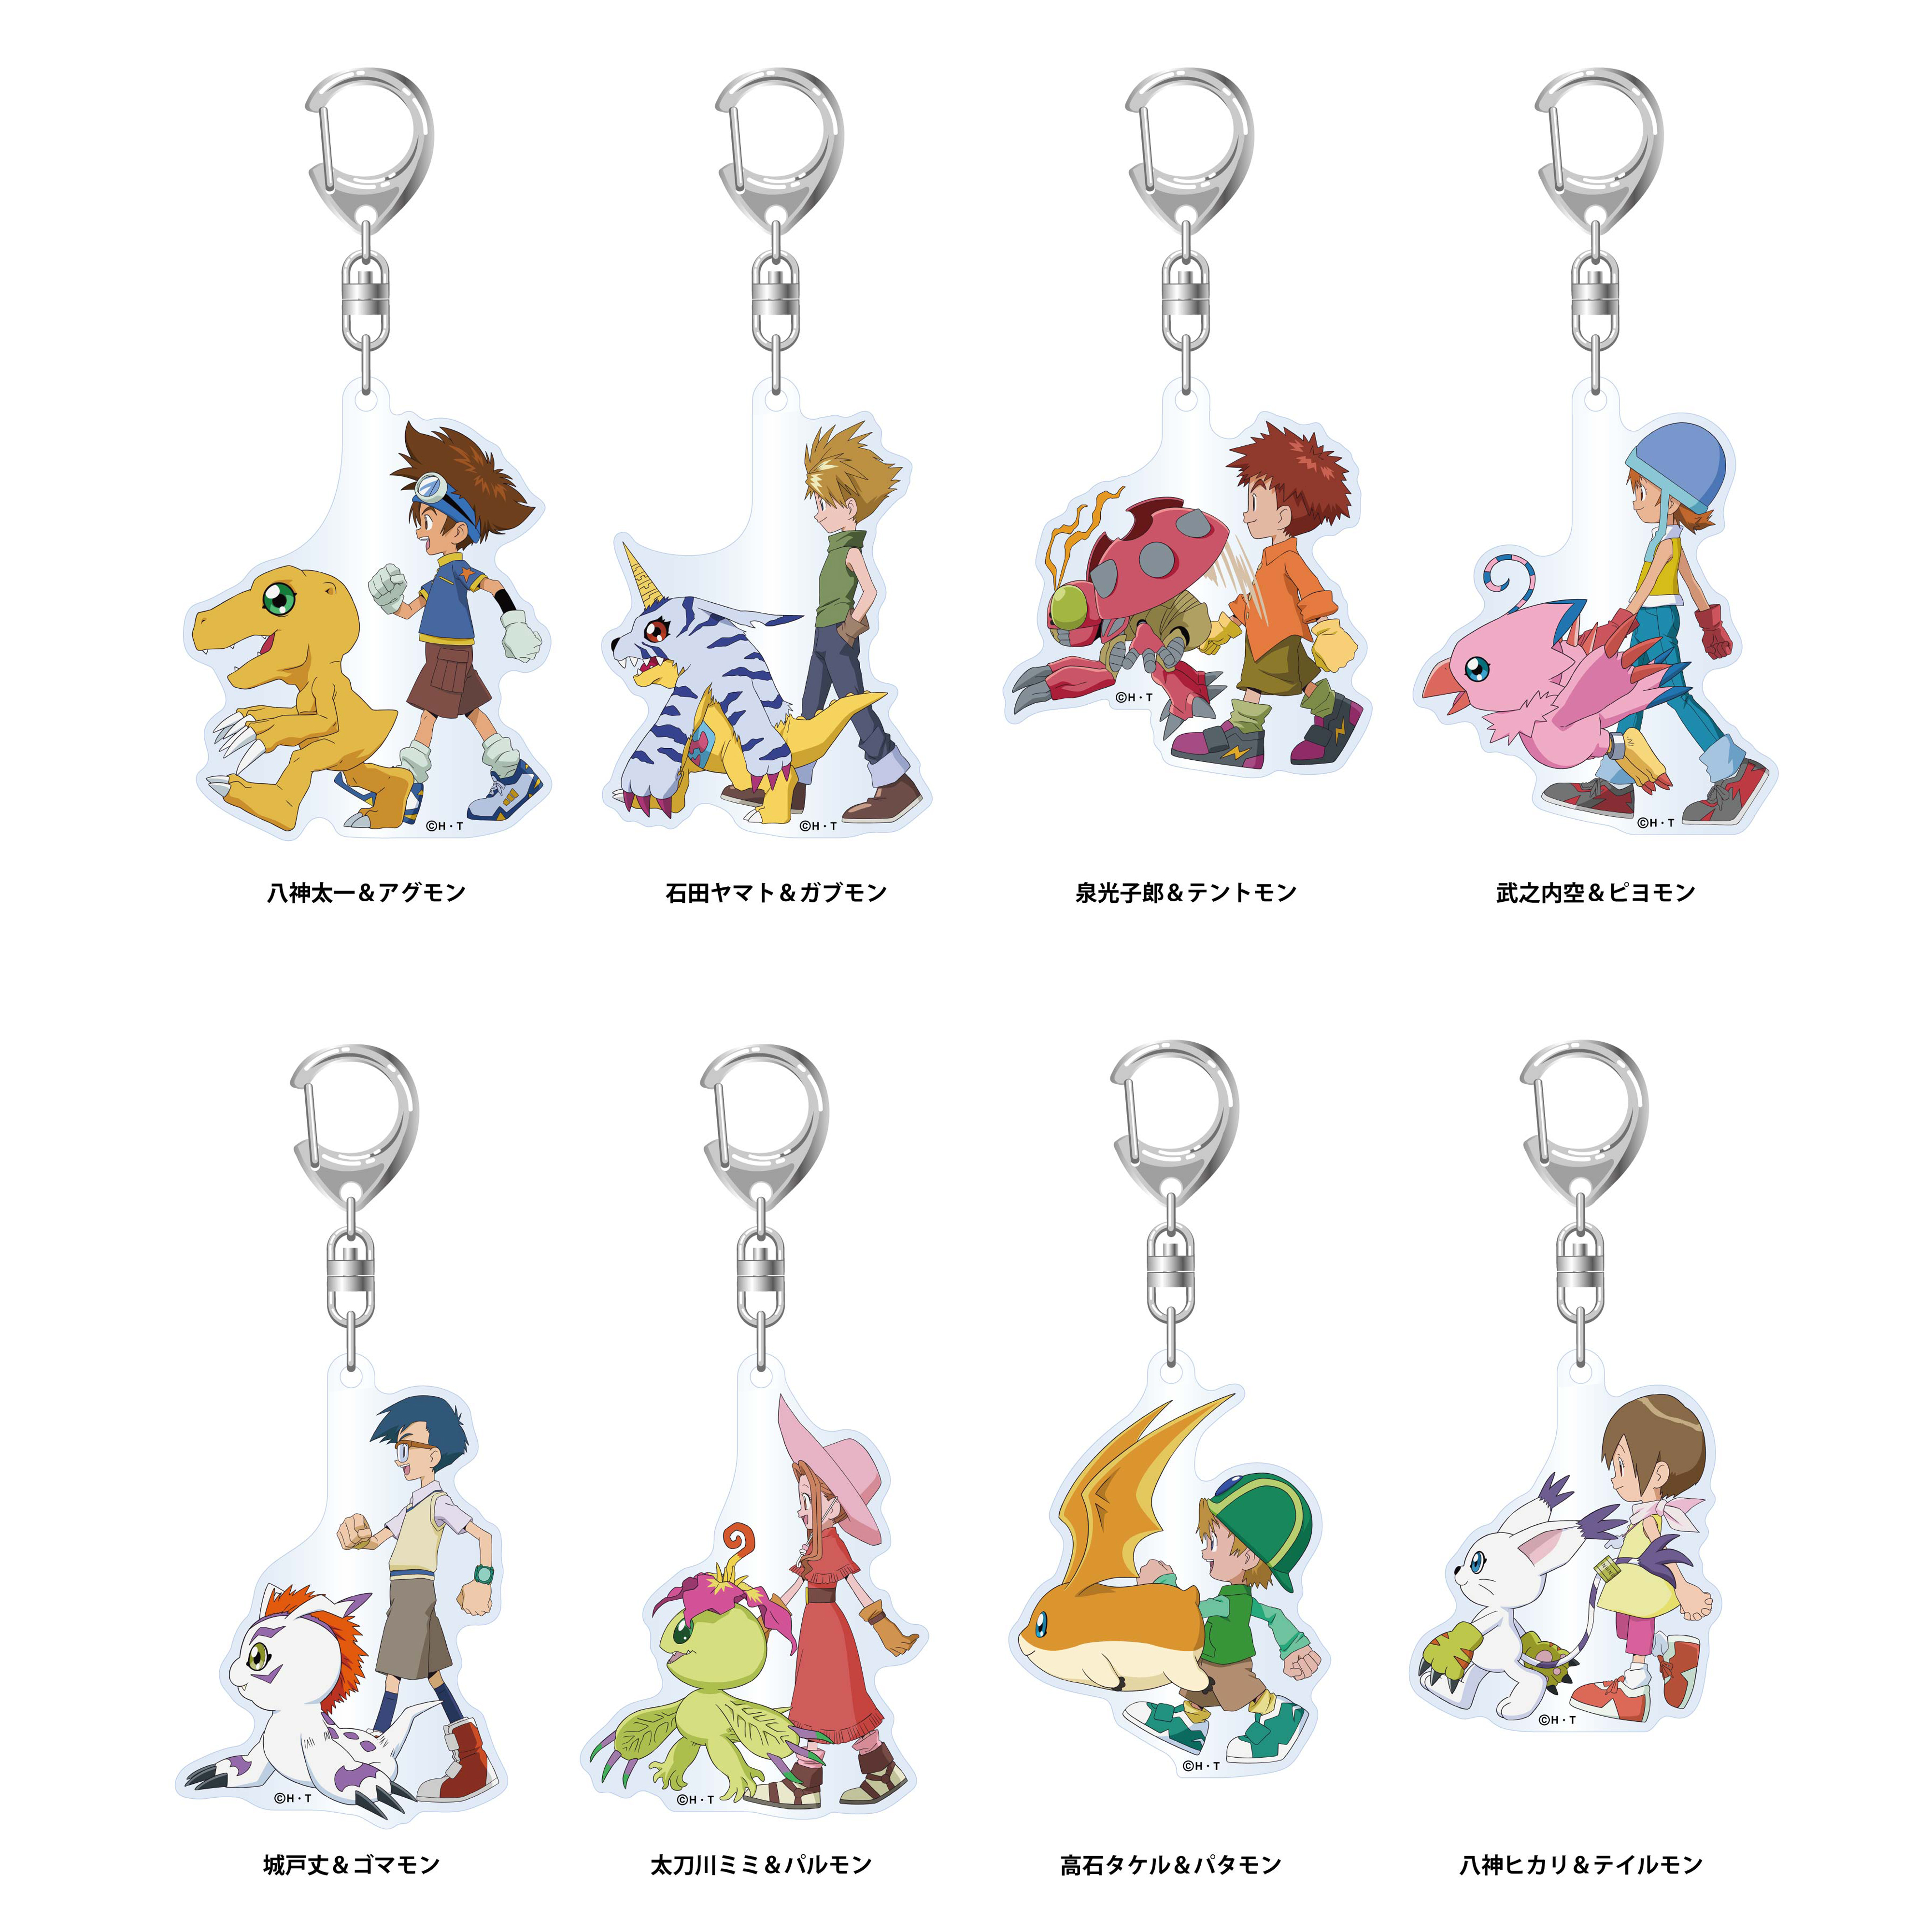 New Digimon Adventure 25th Anniversary Products at AniBirth on 